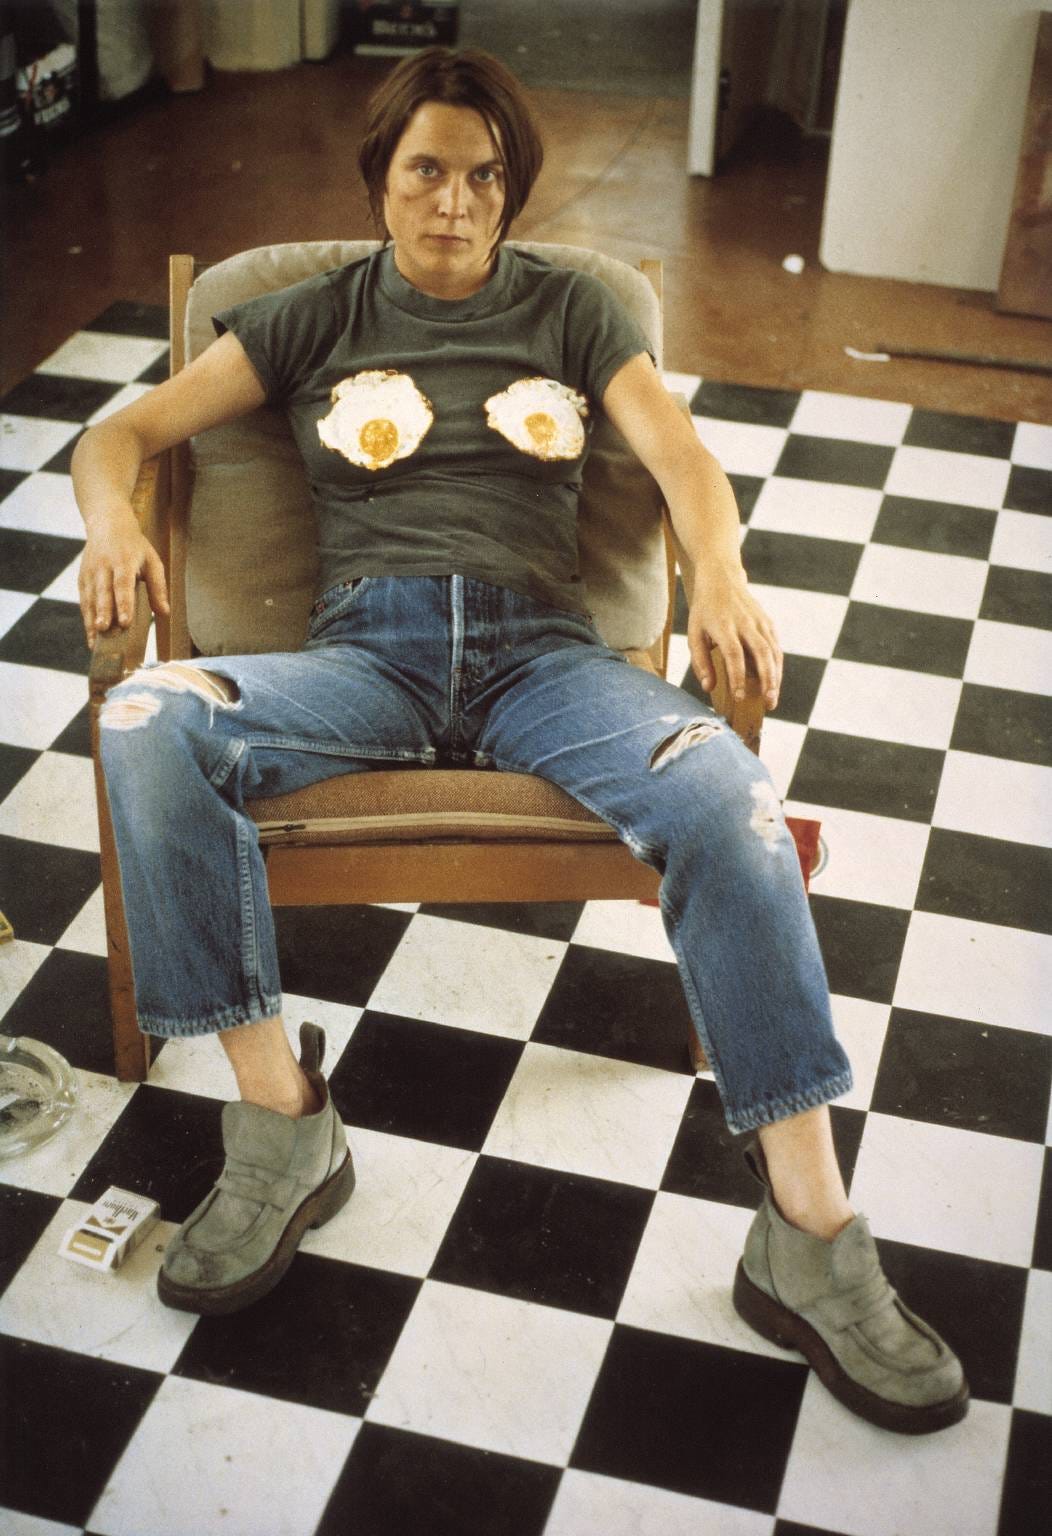 Self Portrait with Fried Eggs', Sarah Lucas, 1996 | Tate